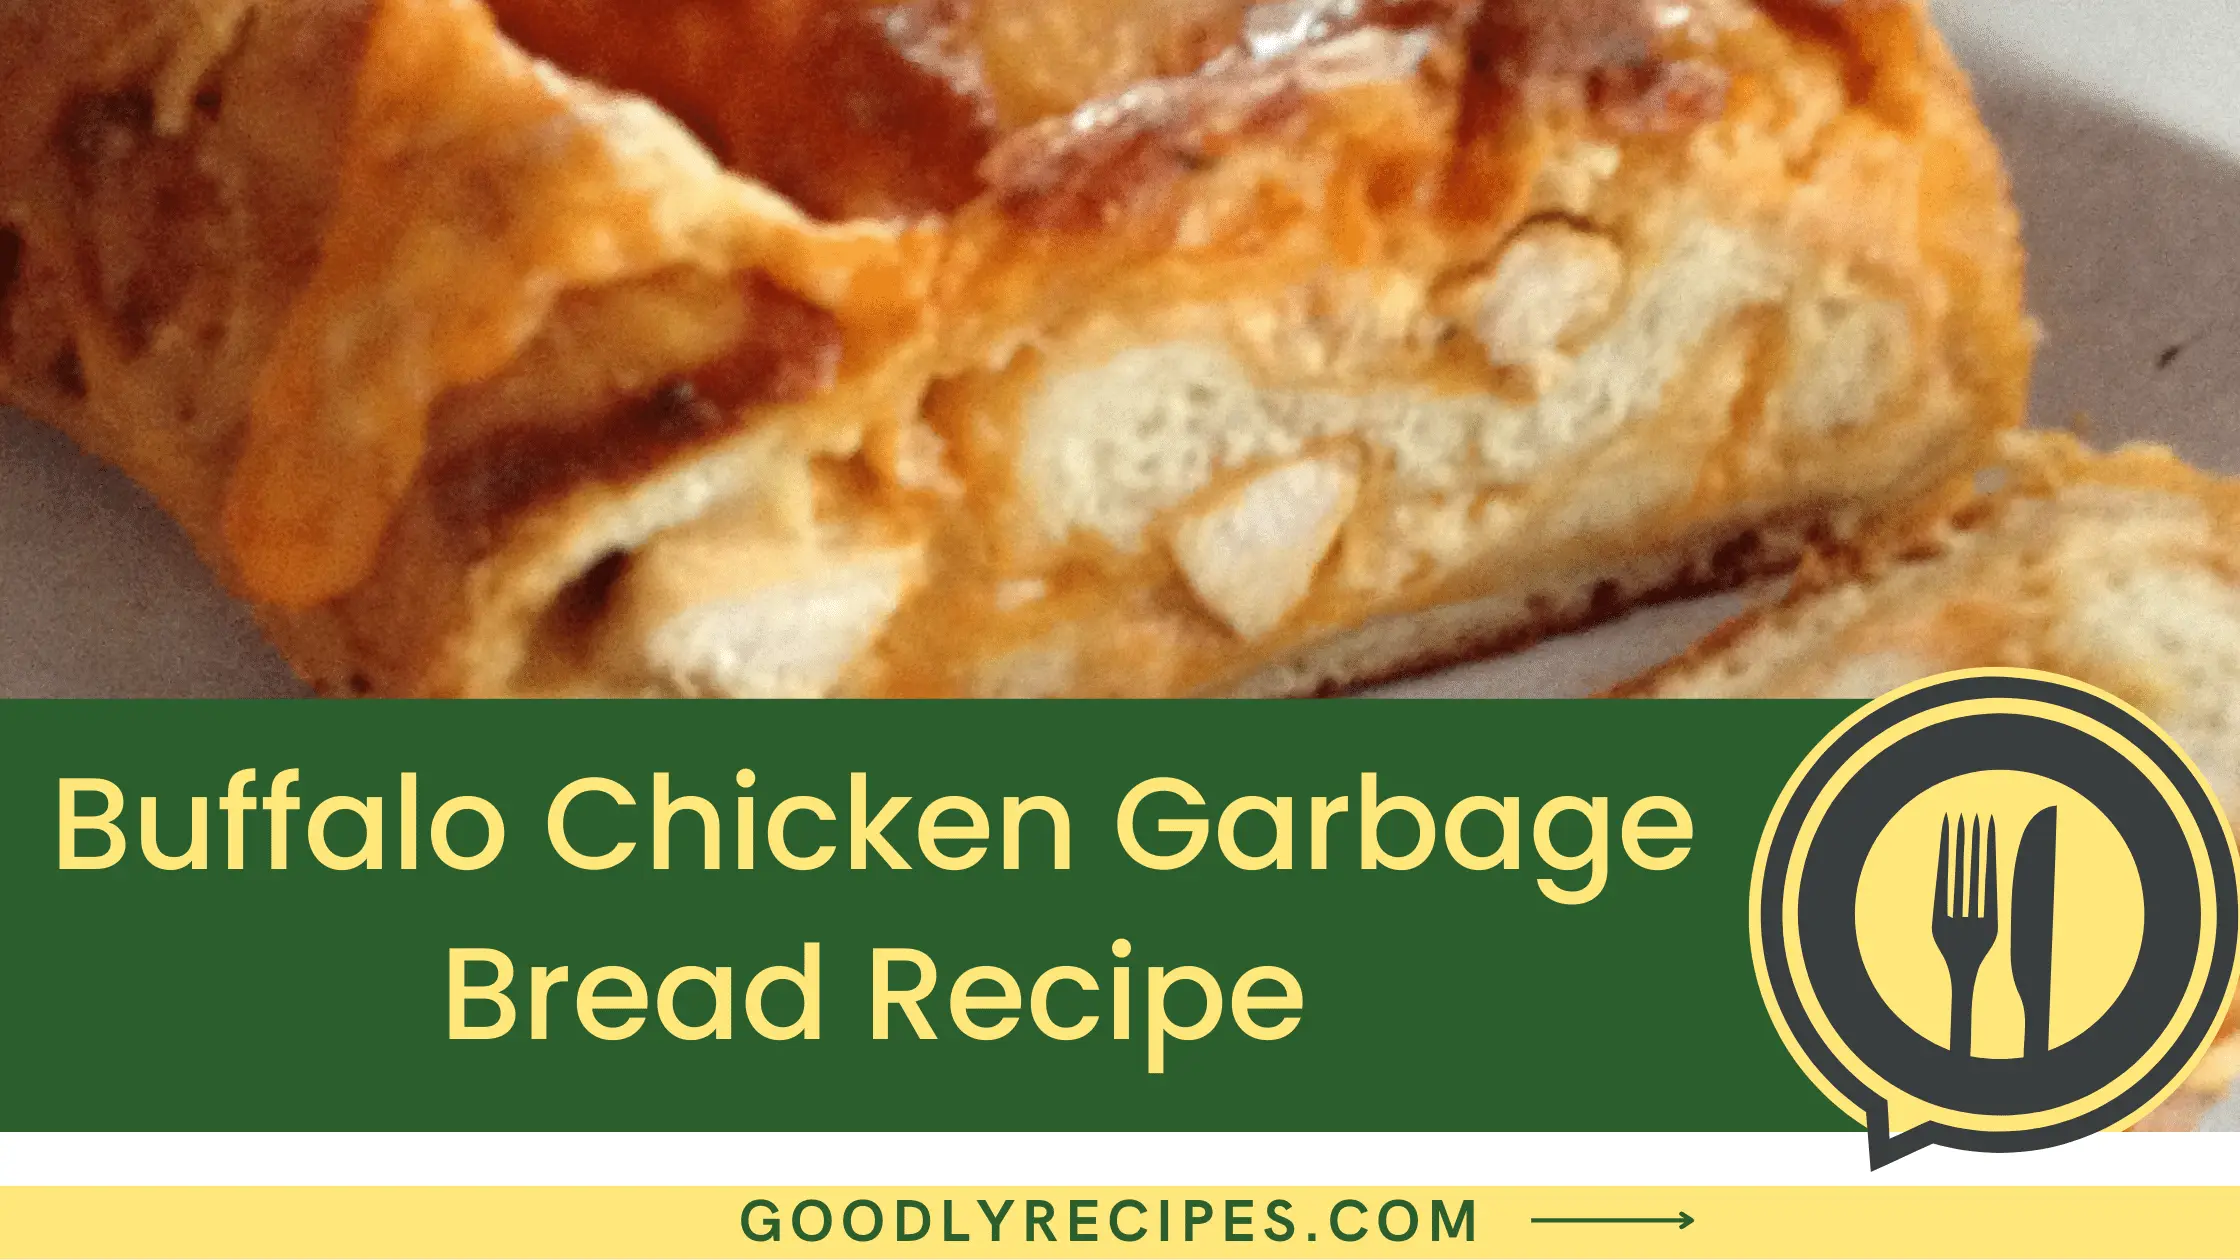 What is Buffalo Chicken Garbage Bread?